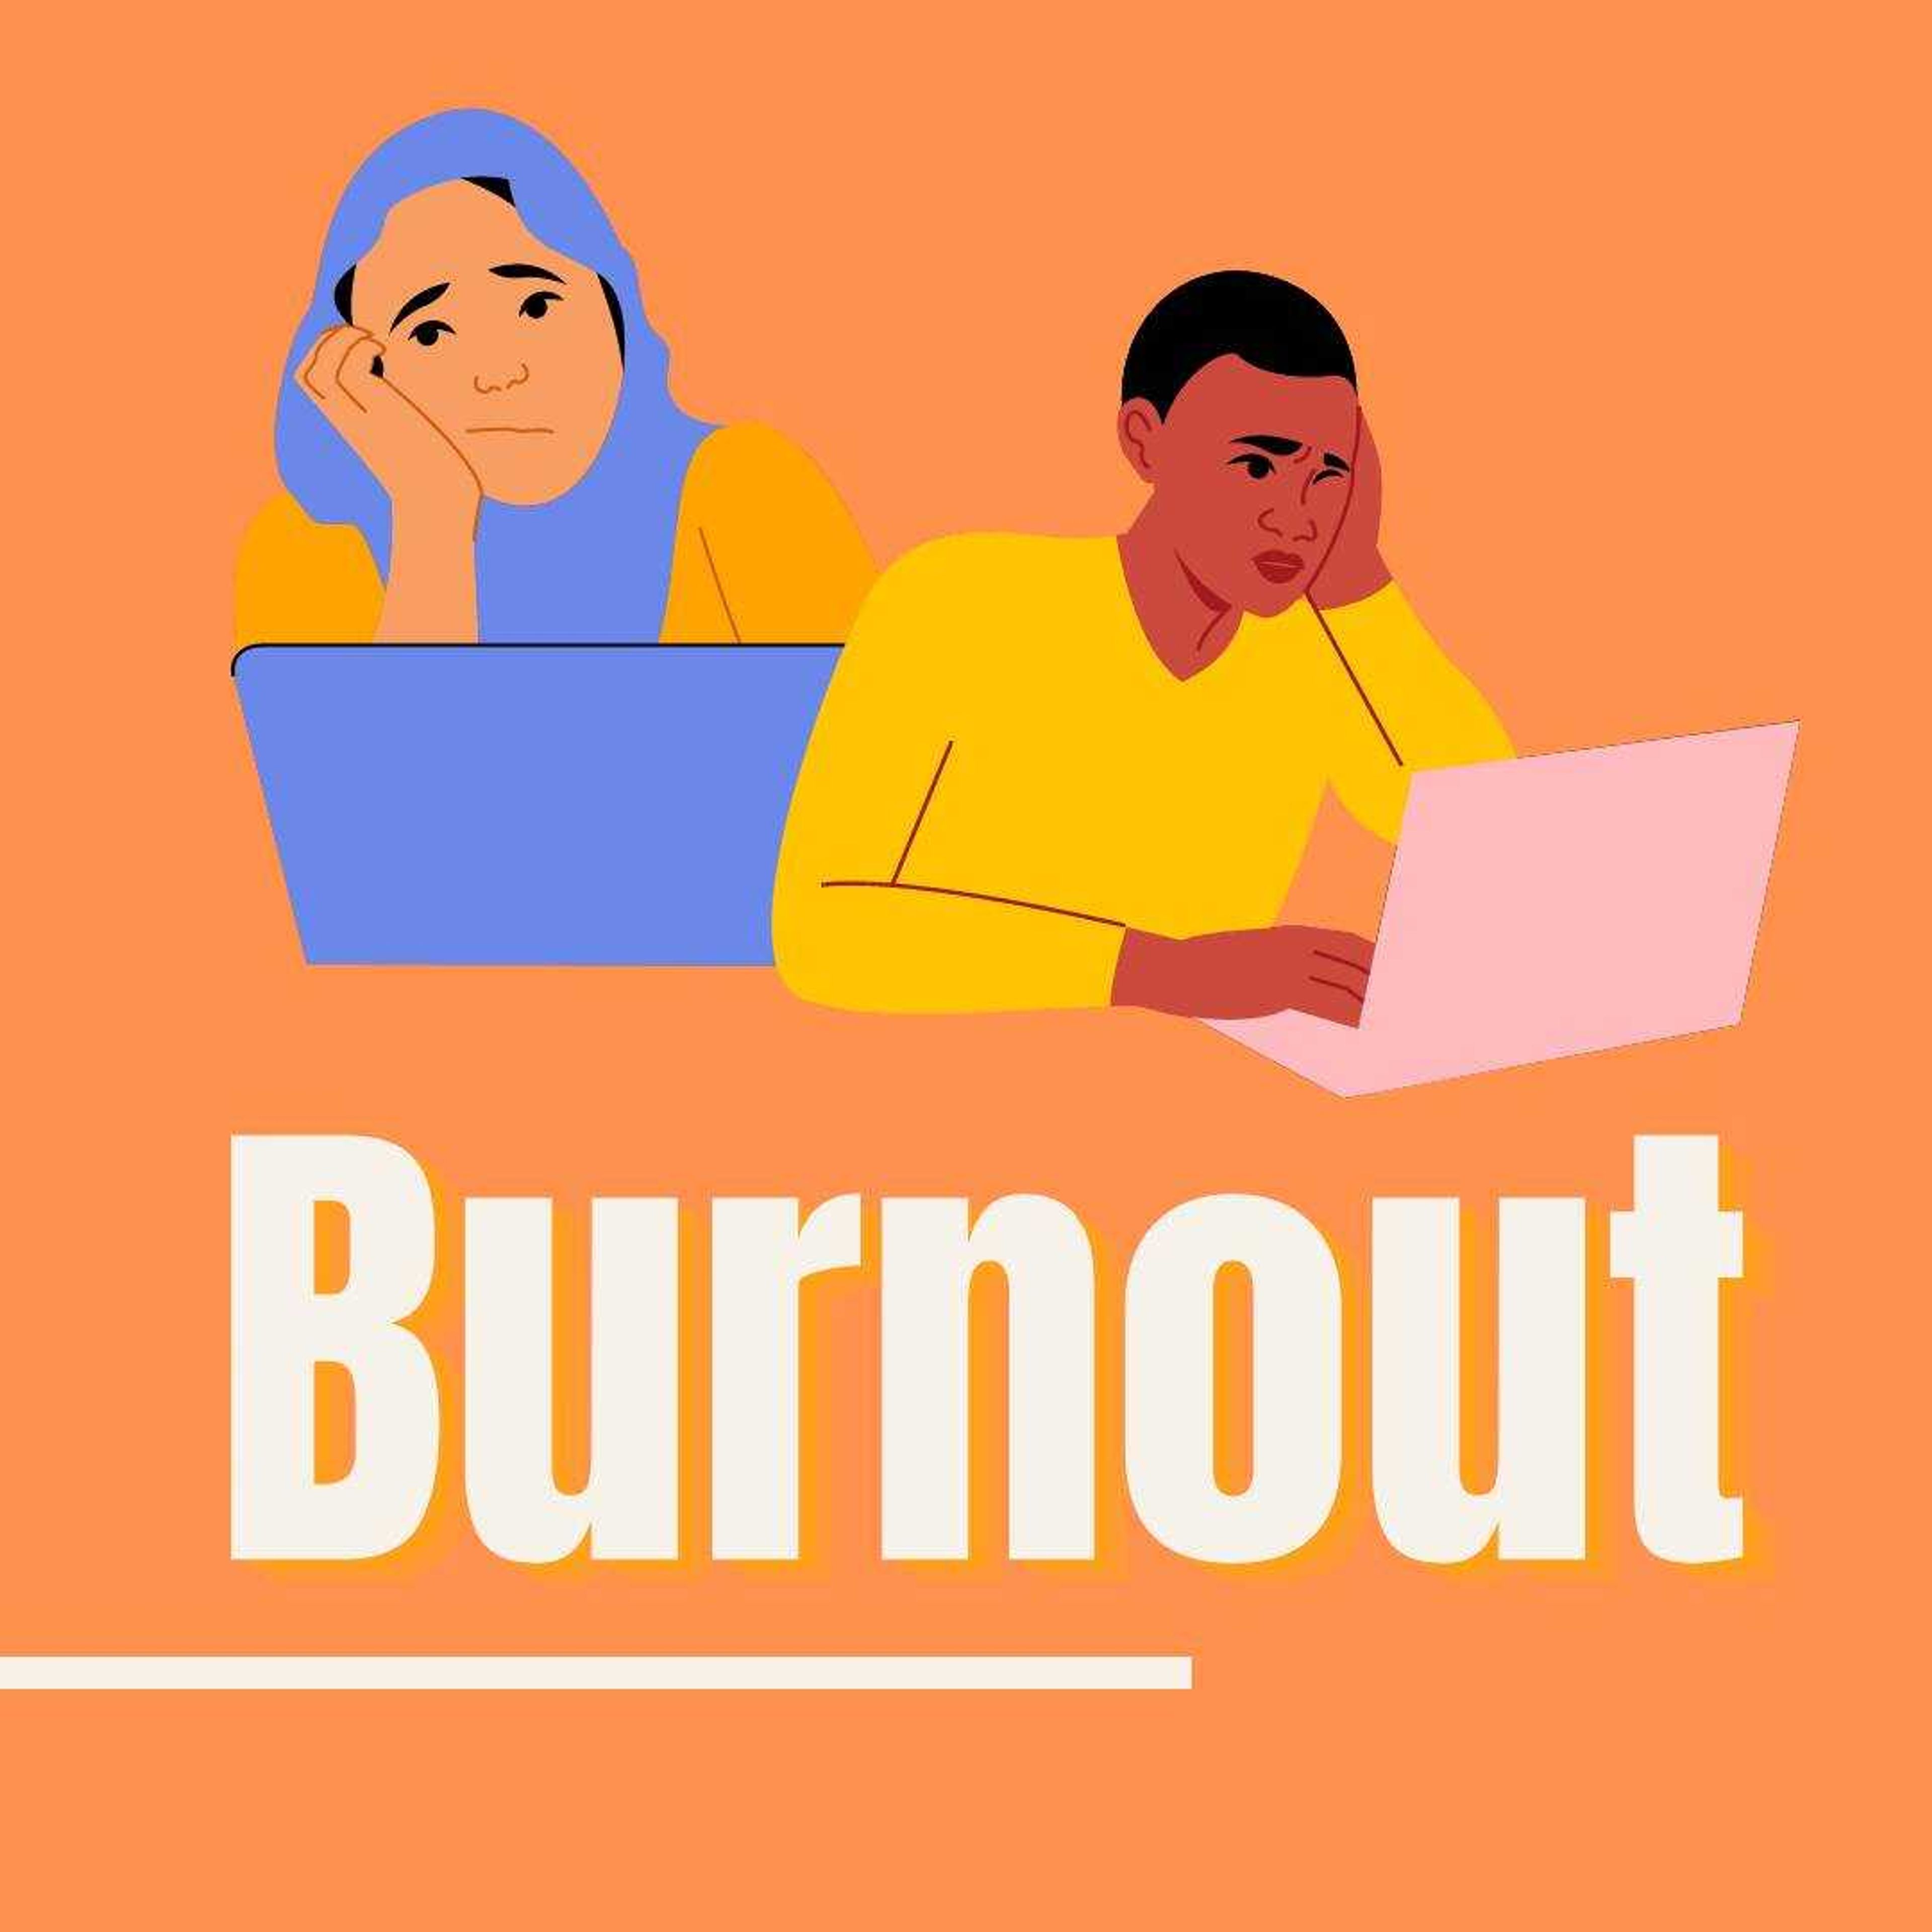 What is burnout, and how can it be prevented?